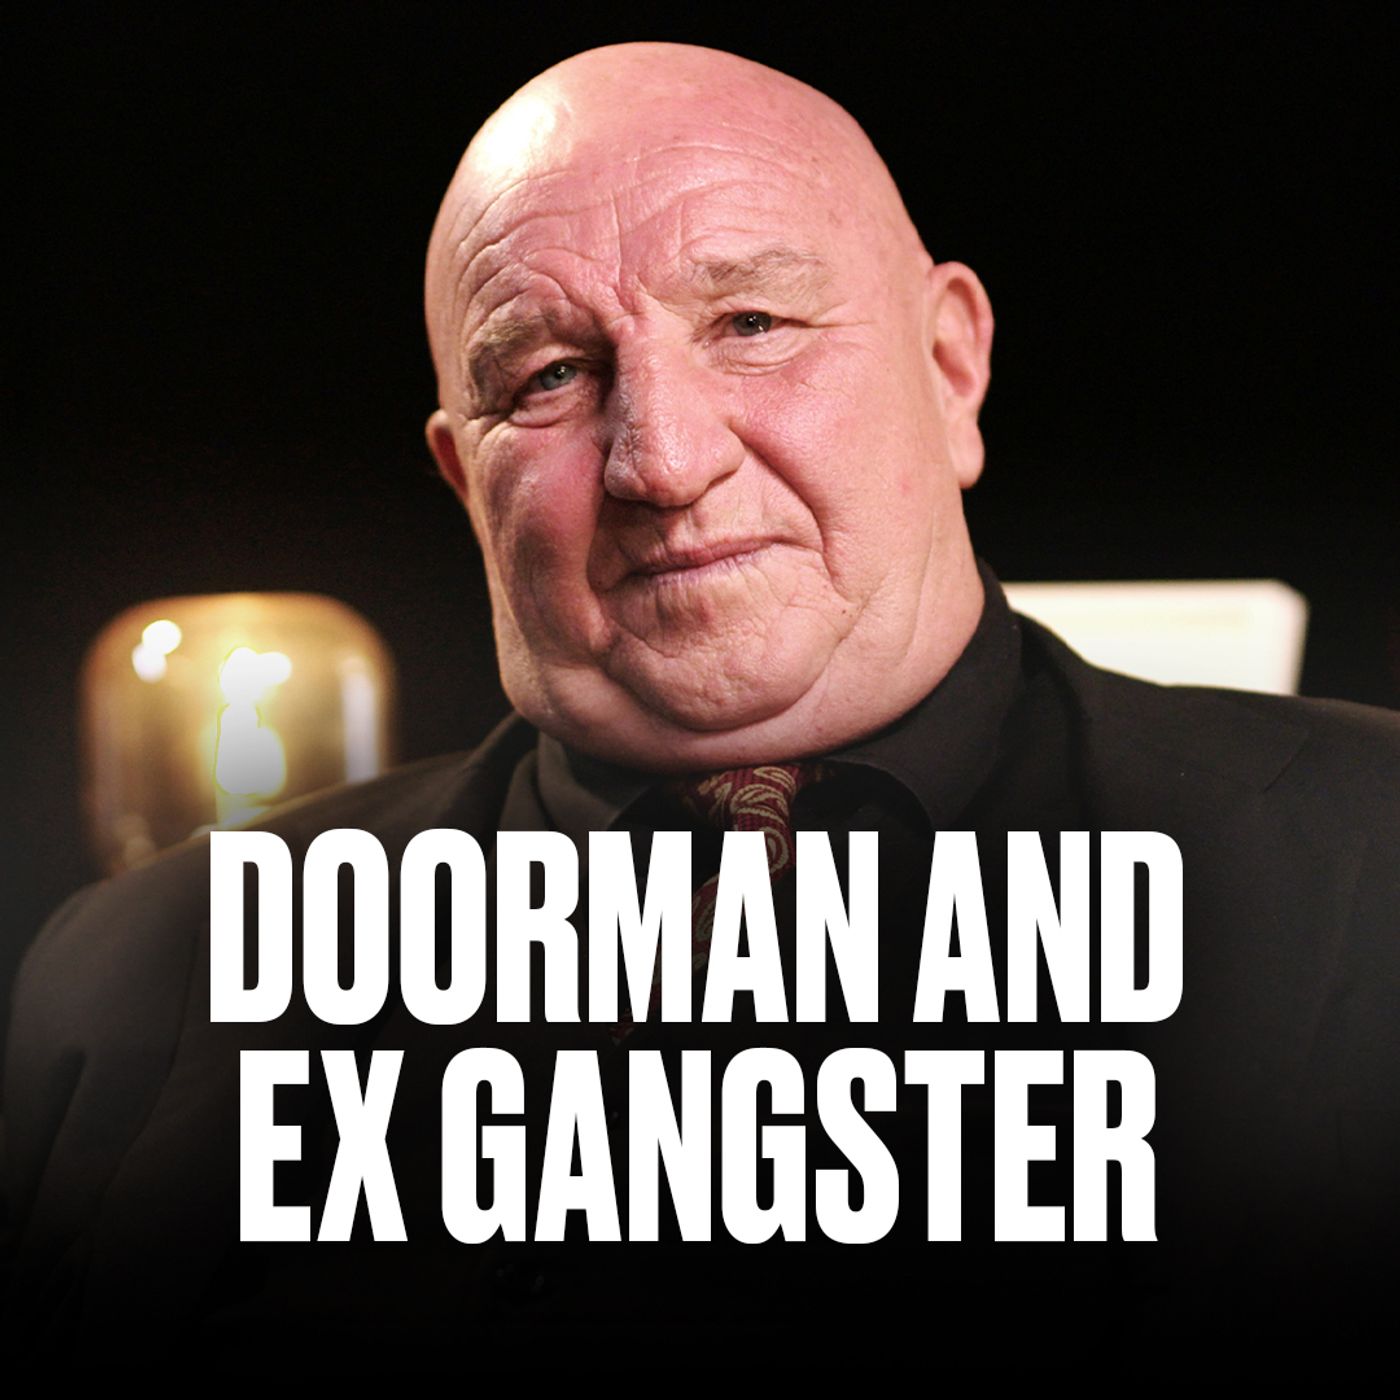 S2 Ep16: London "Celebrity Gangster" Dave Courtney Tells His Life Story